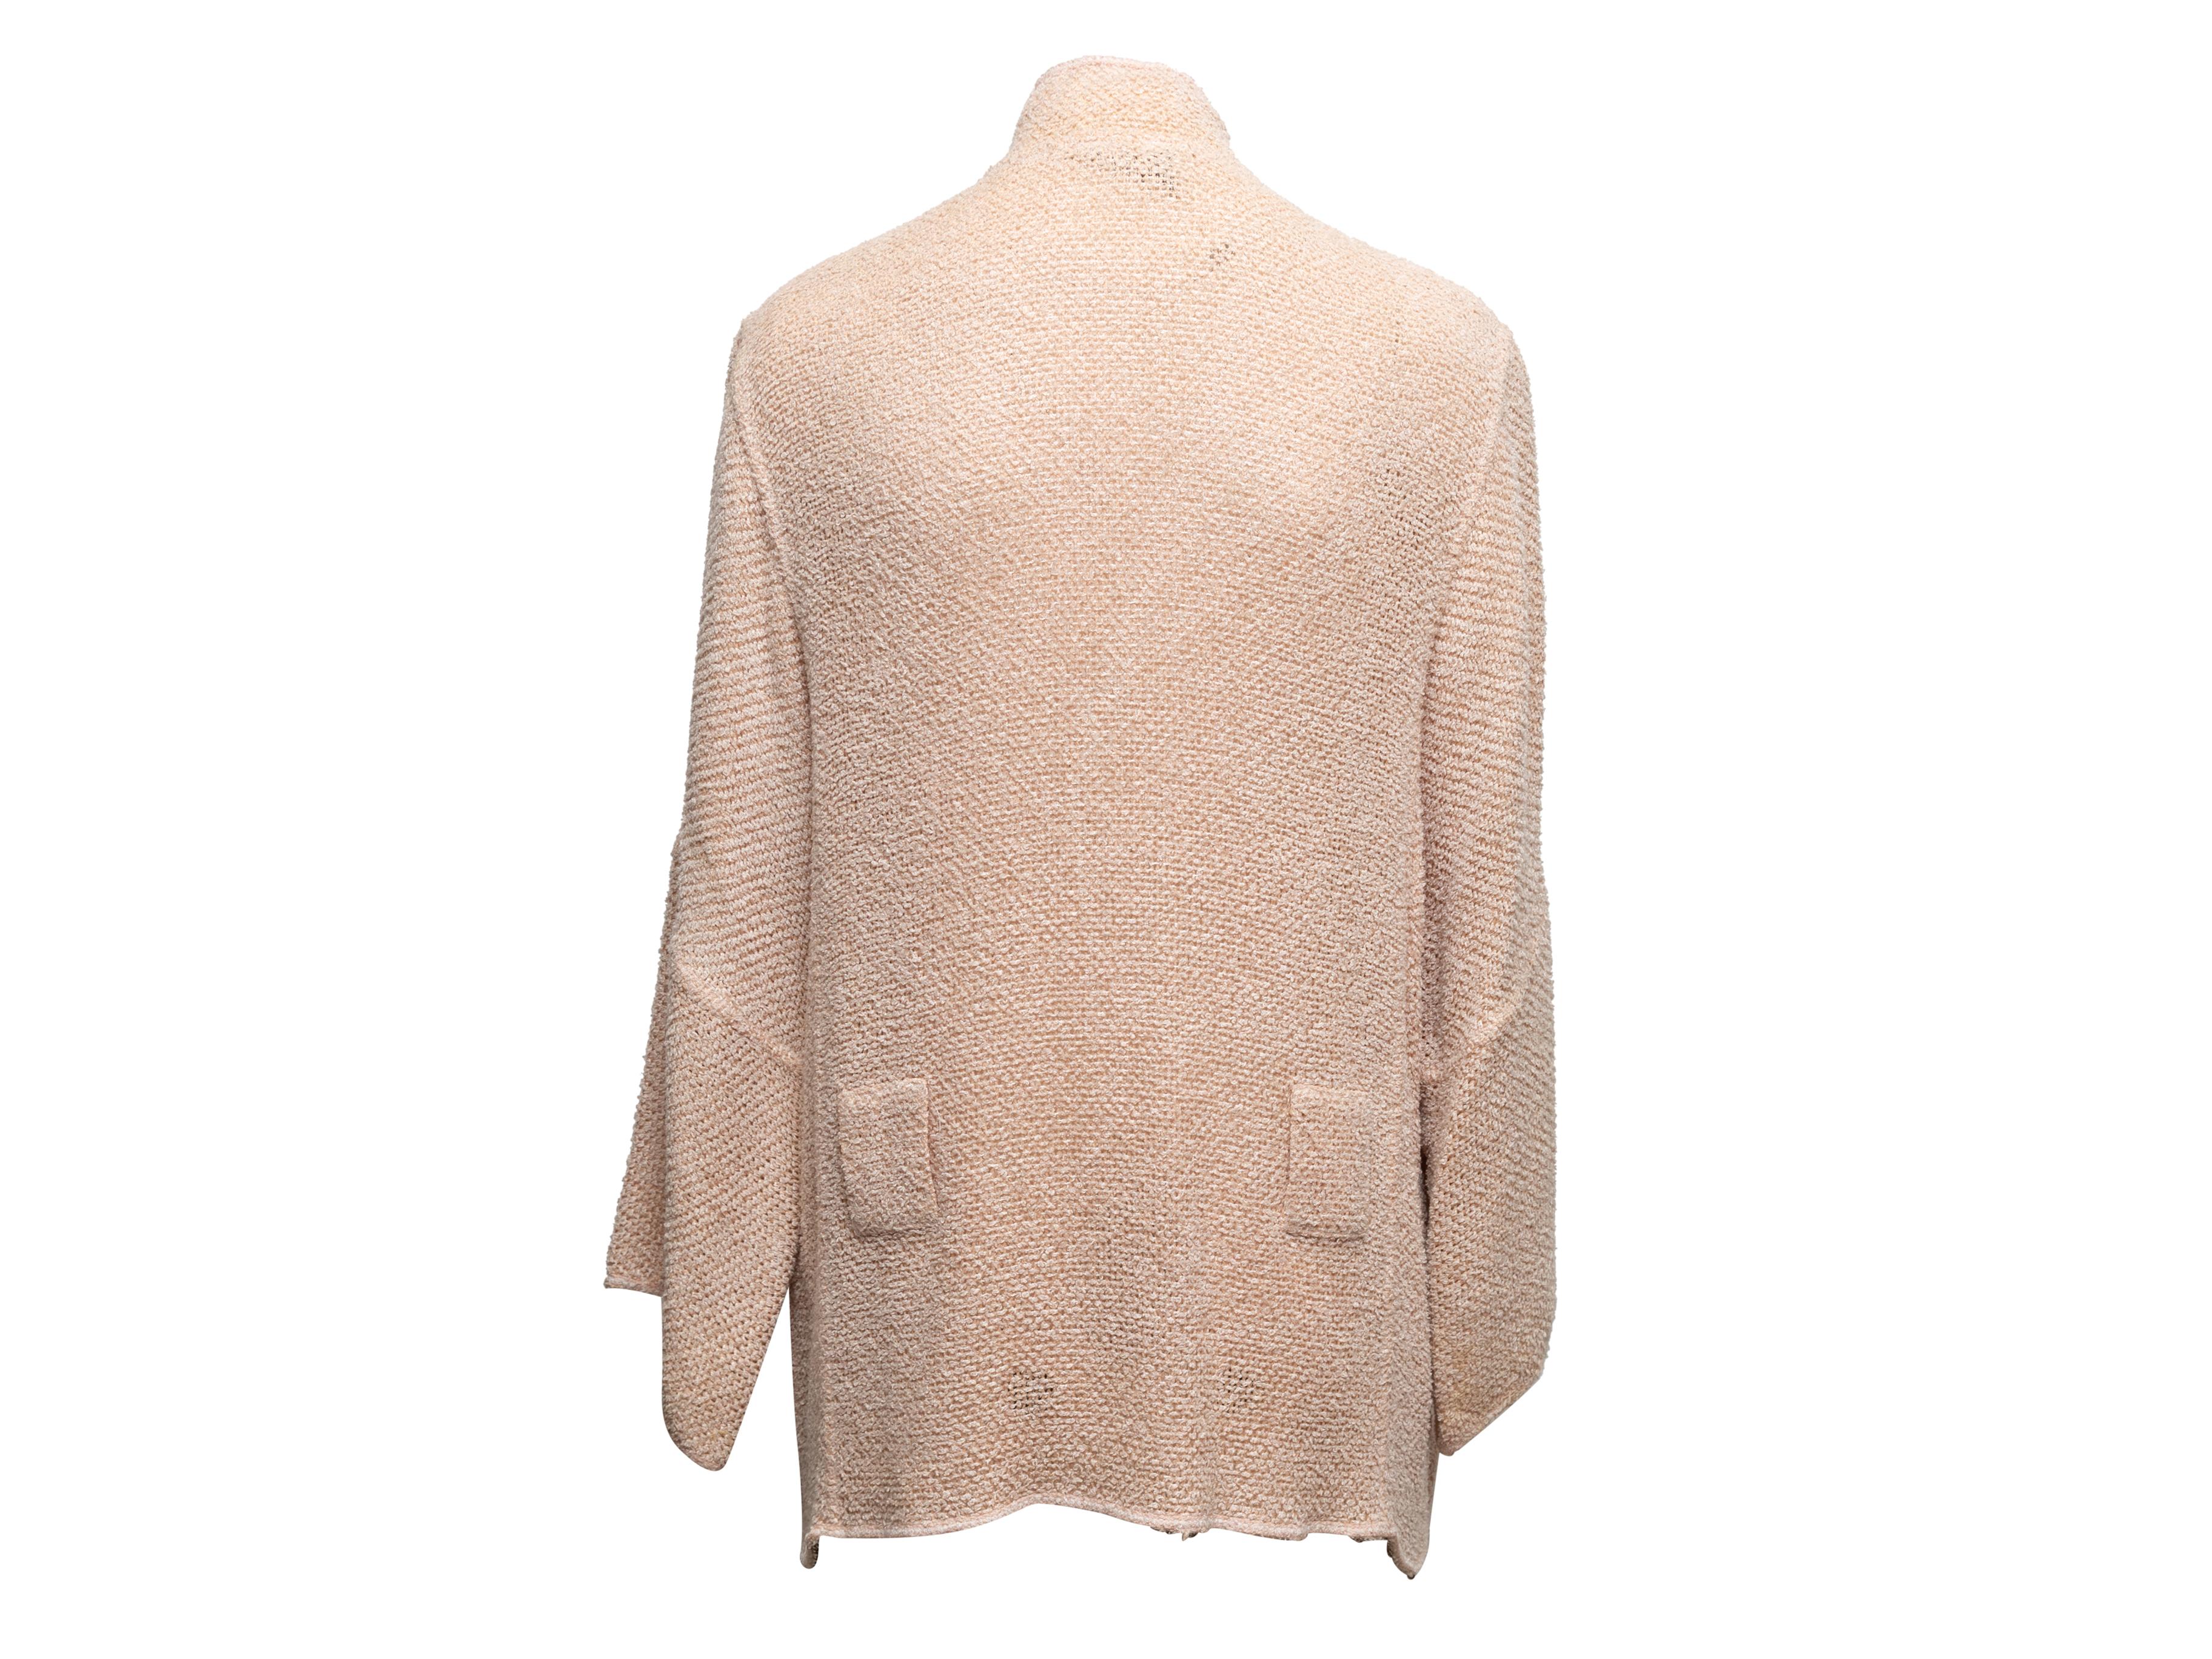 Vintage Blush Chanel Boutique Cruise 1999 Knit Jacket Size FR 46 In Good Condition For Sale In New York, NY